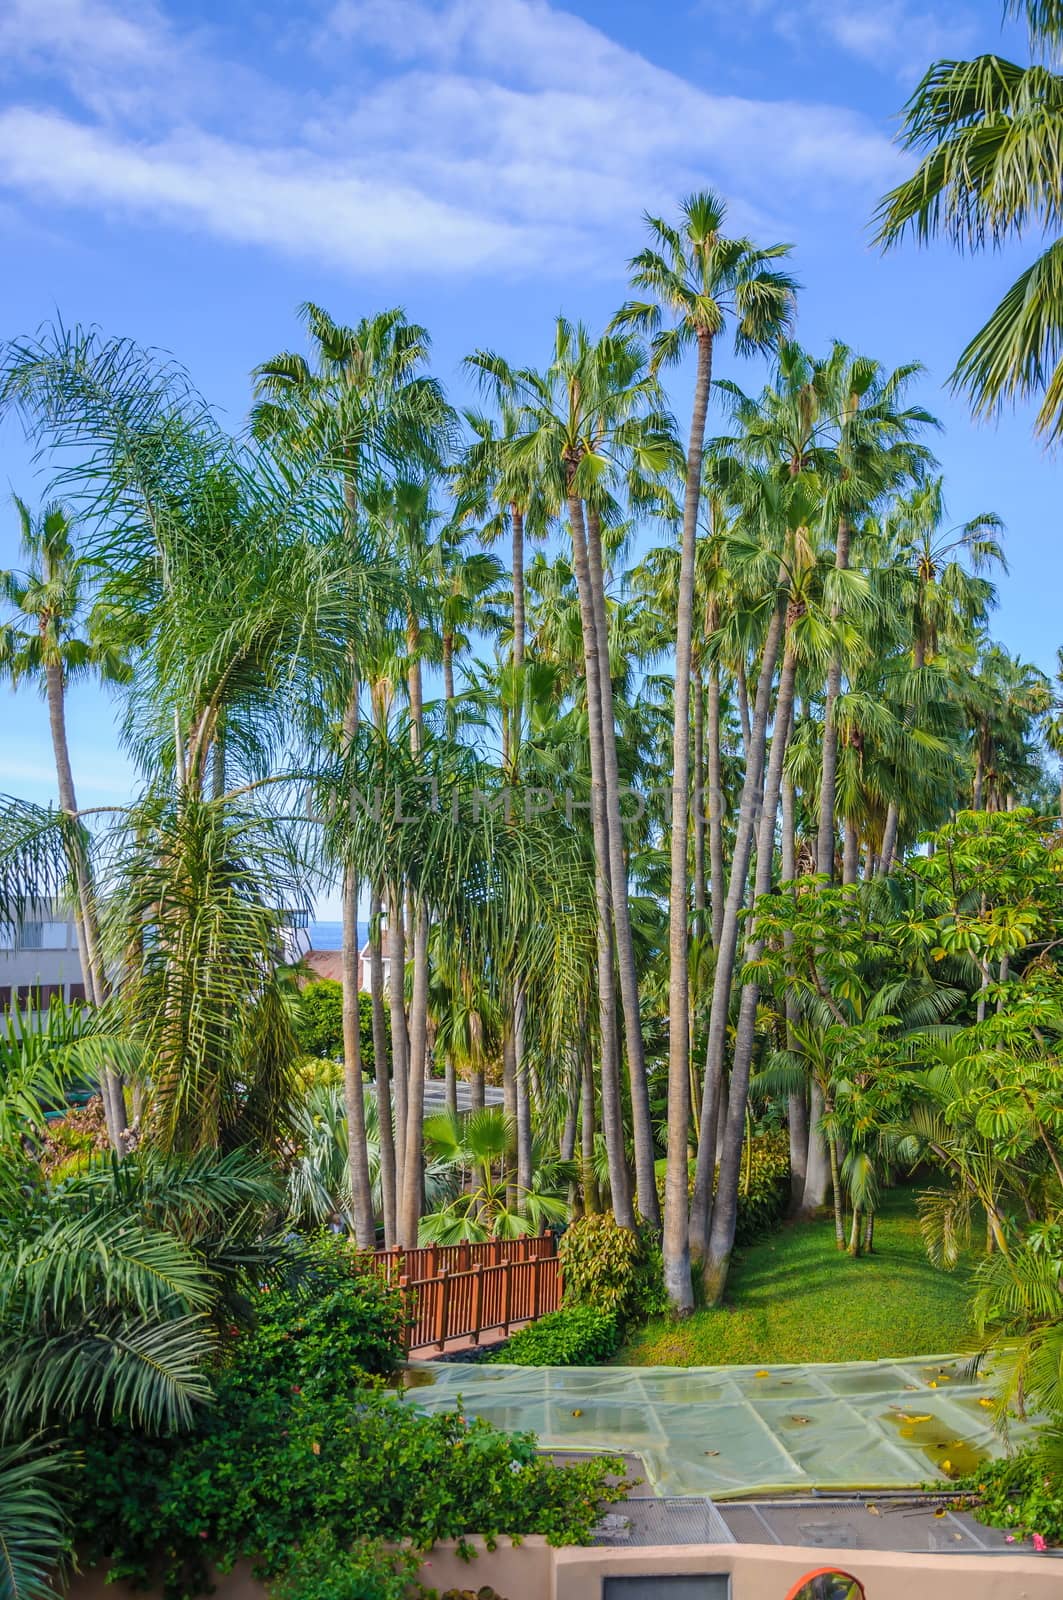 Tall palms in Loro Parque, Tenerife on Canary Islands.